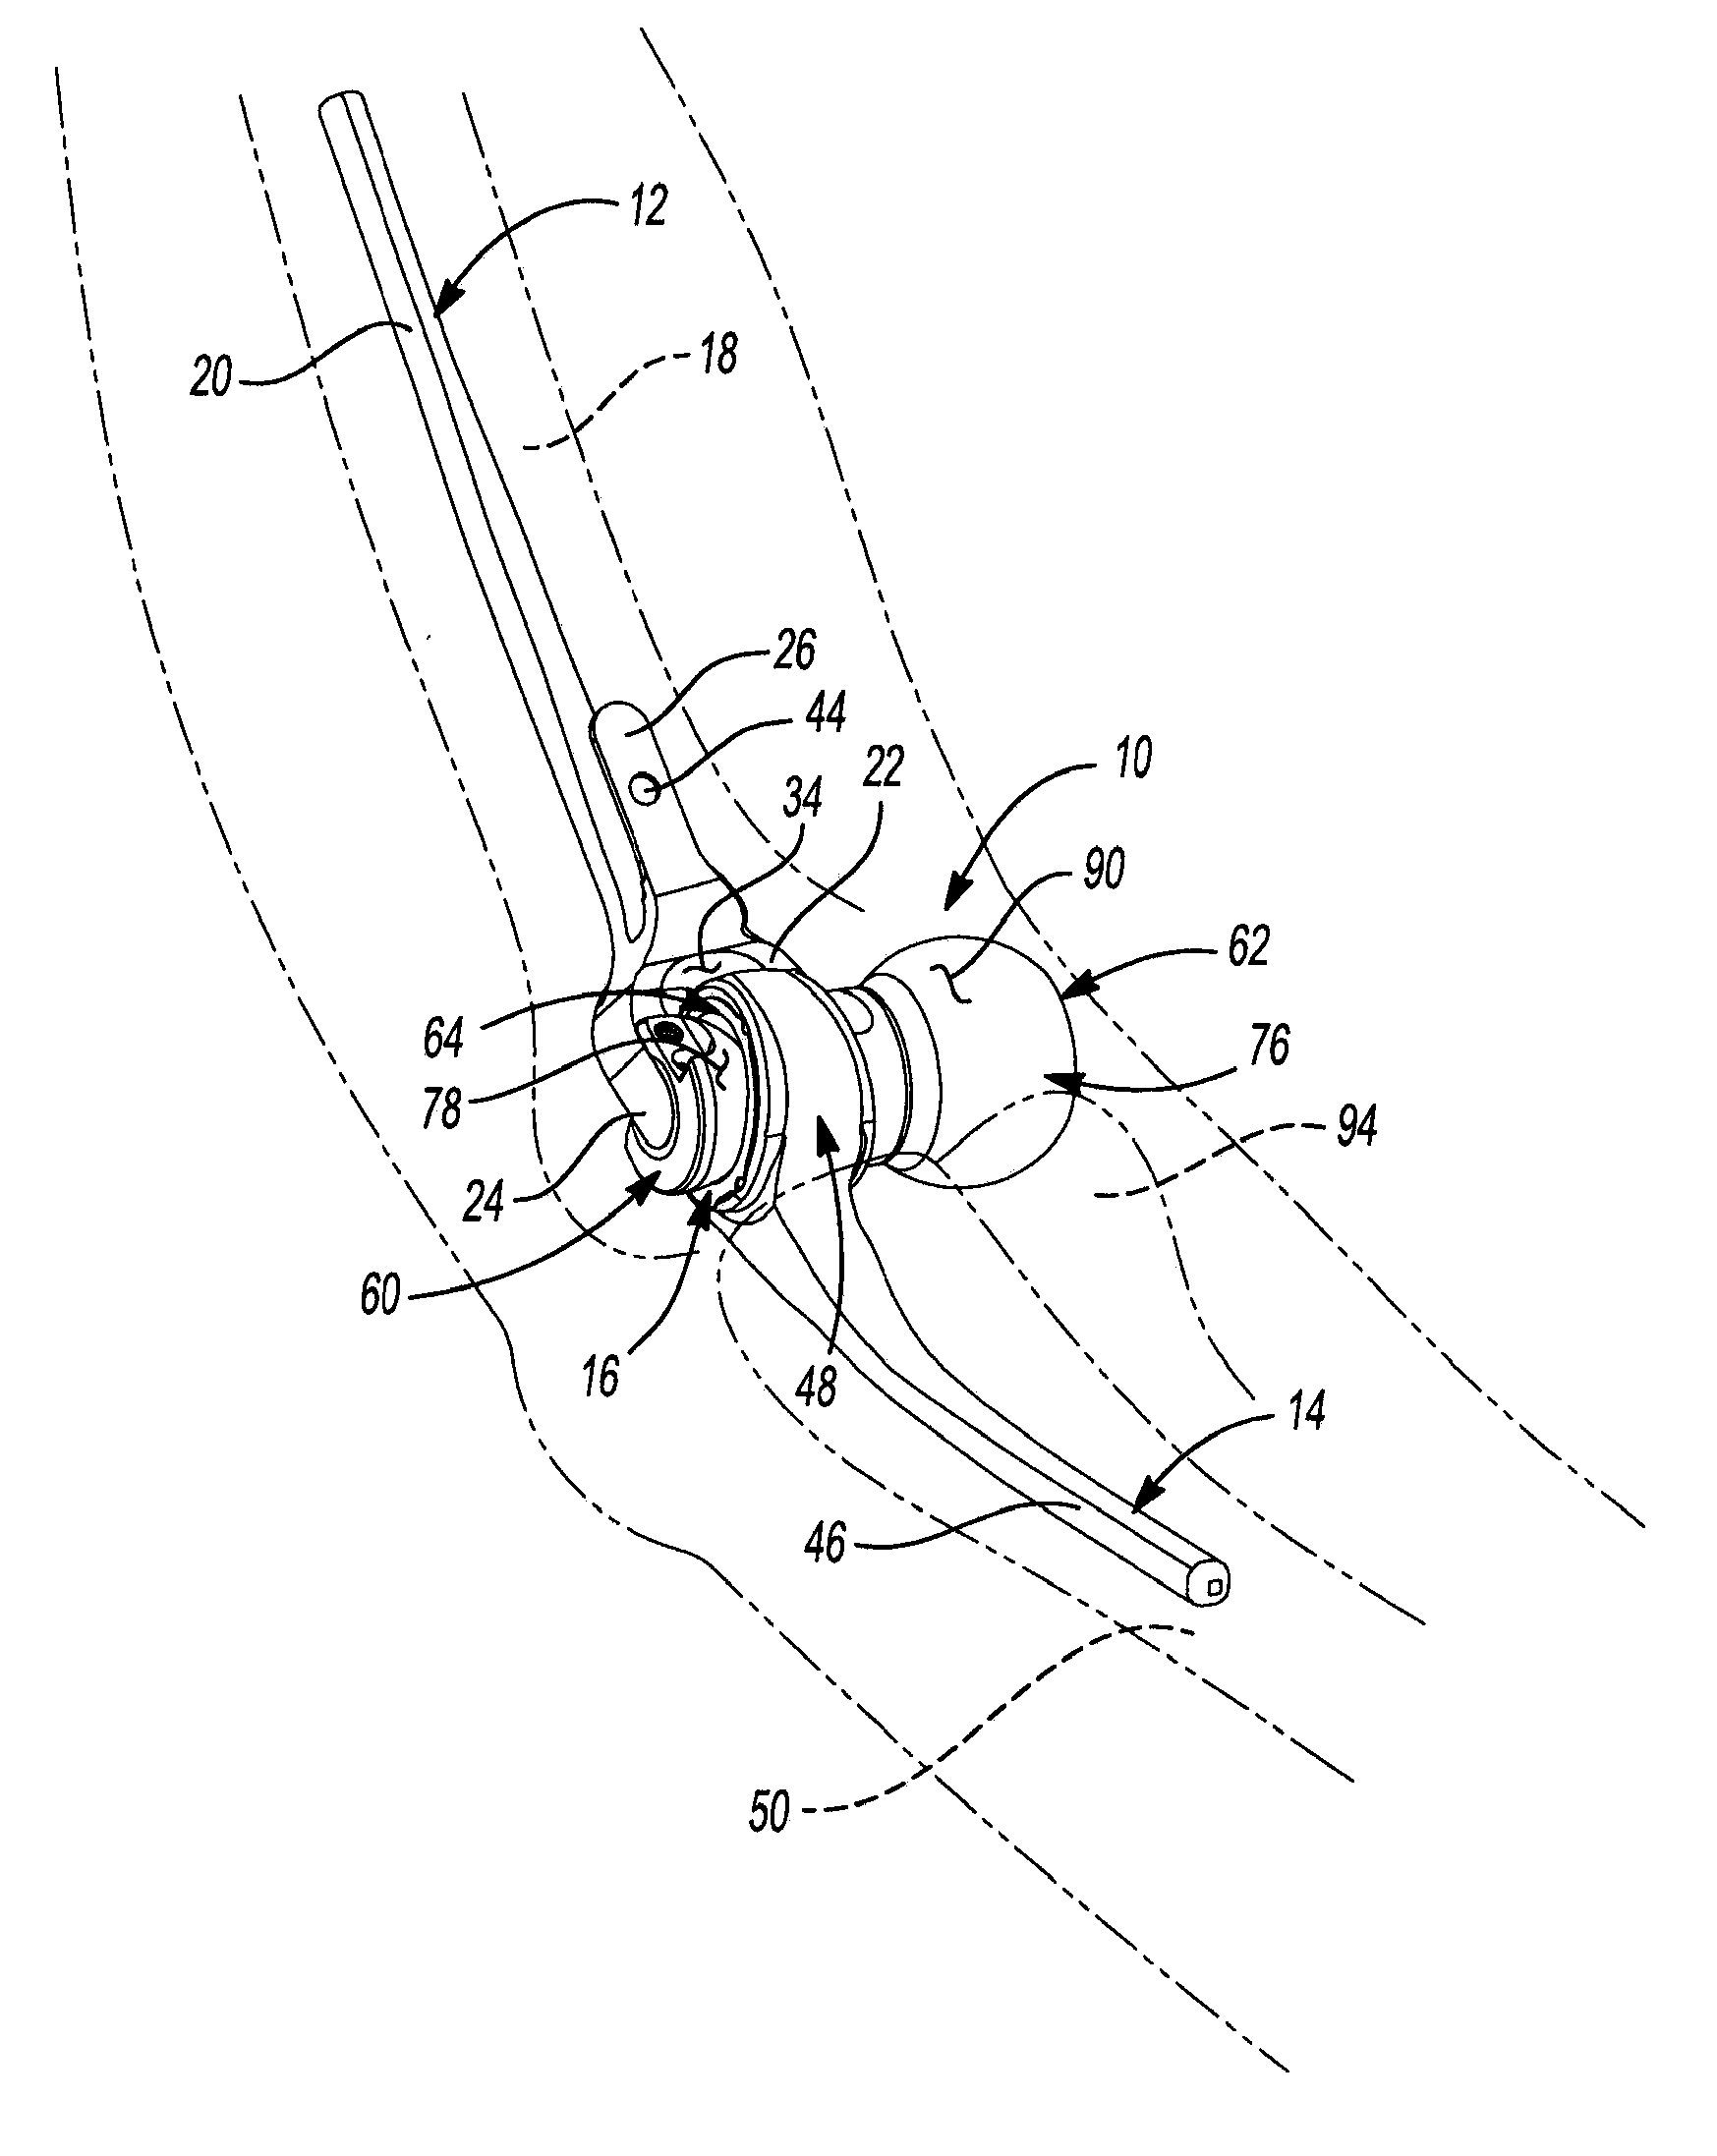 Adjustable lateral articulating condyle